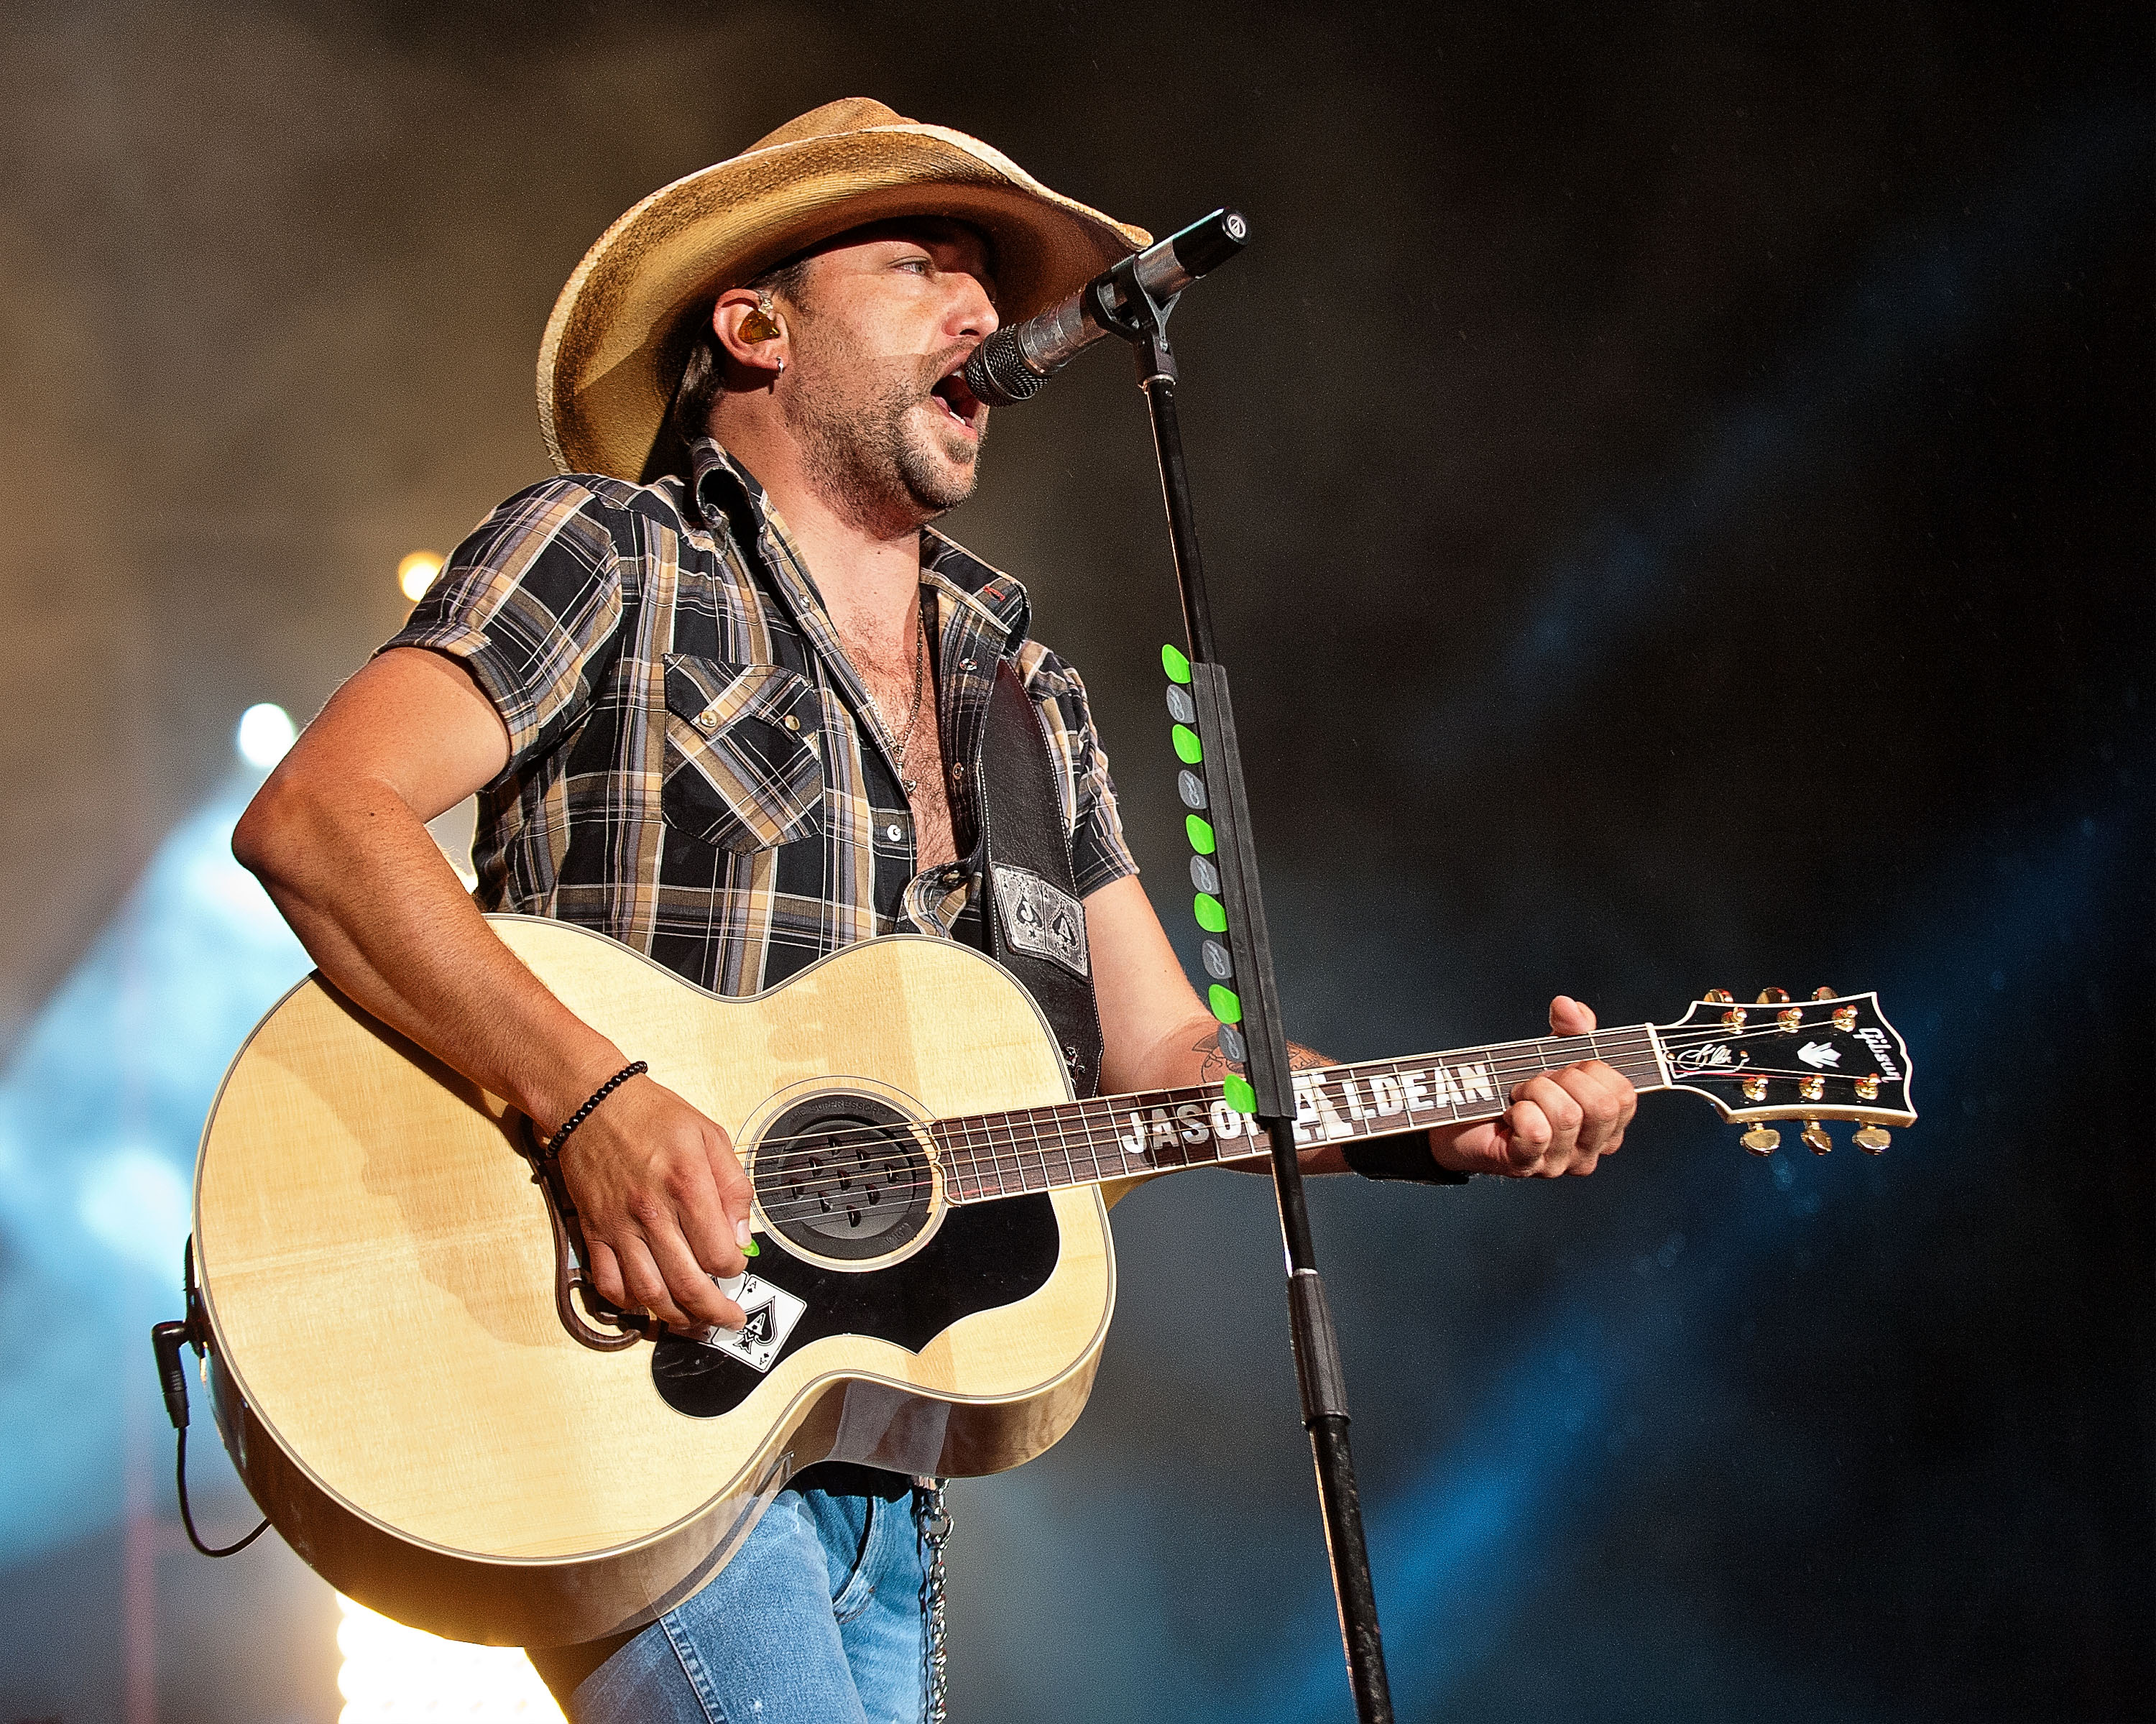 ason Aldean performs during the Night Train Tour at Wrigley Field on July 20, 2013 in Chicago | Source: Getty Images